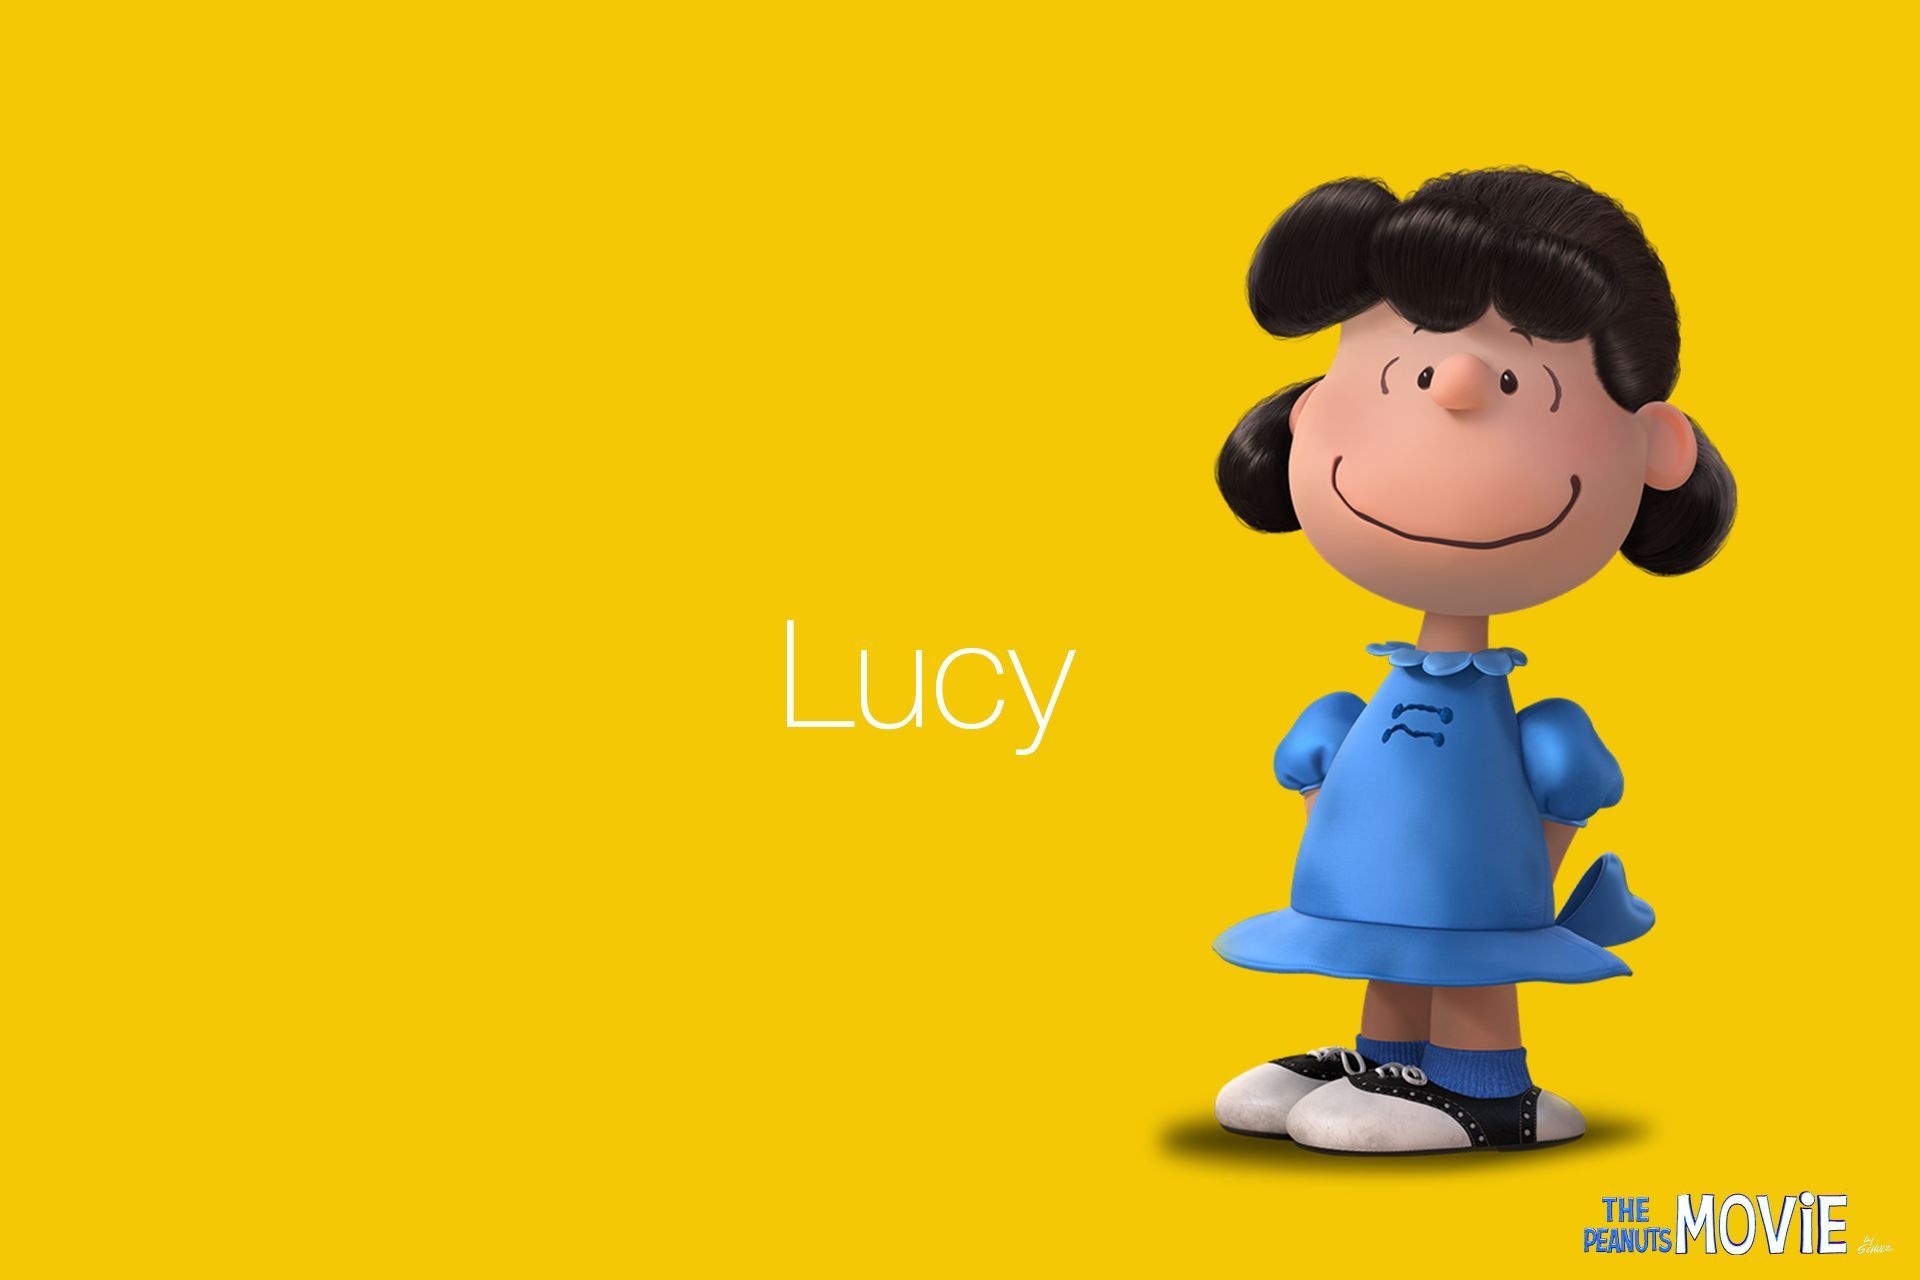 The Peanuts Movie, Lucy wallpapers, Top free backgrounds, Iconic Peanuts character, 1920x1280 HD Desktop